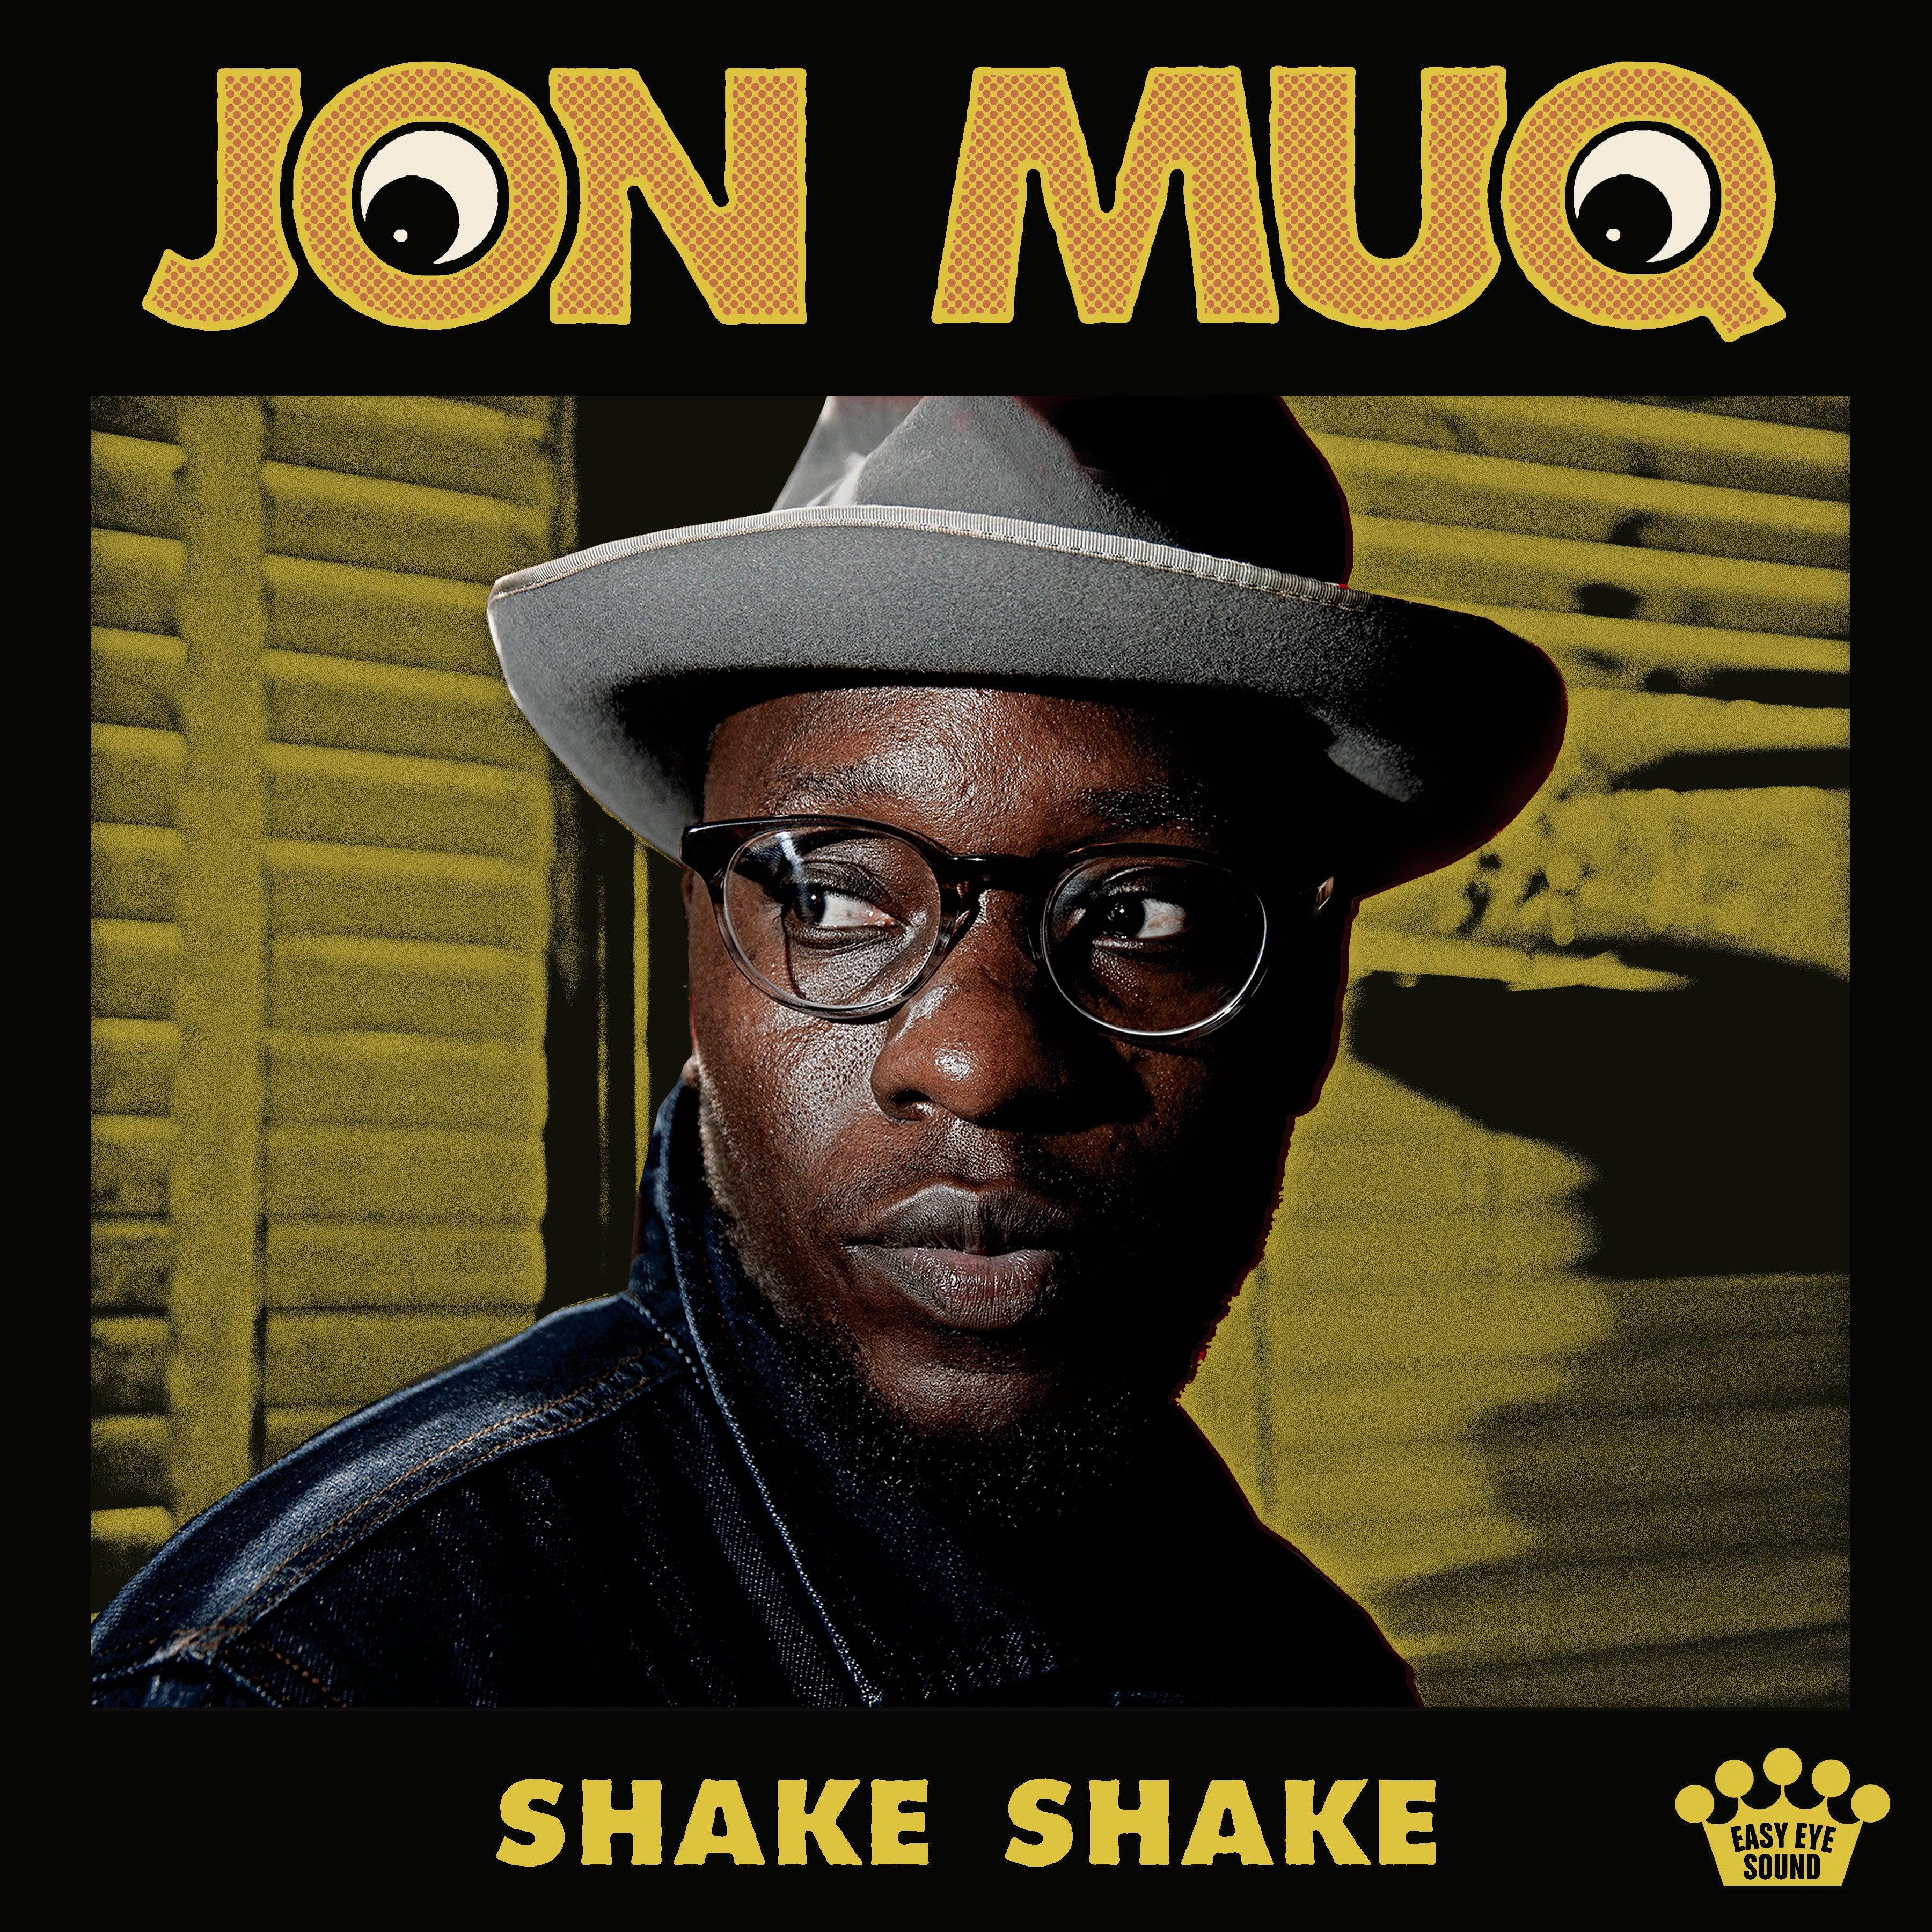 Jon Muq announces his debut album with his brand new song, "Shake Shake," out now